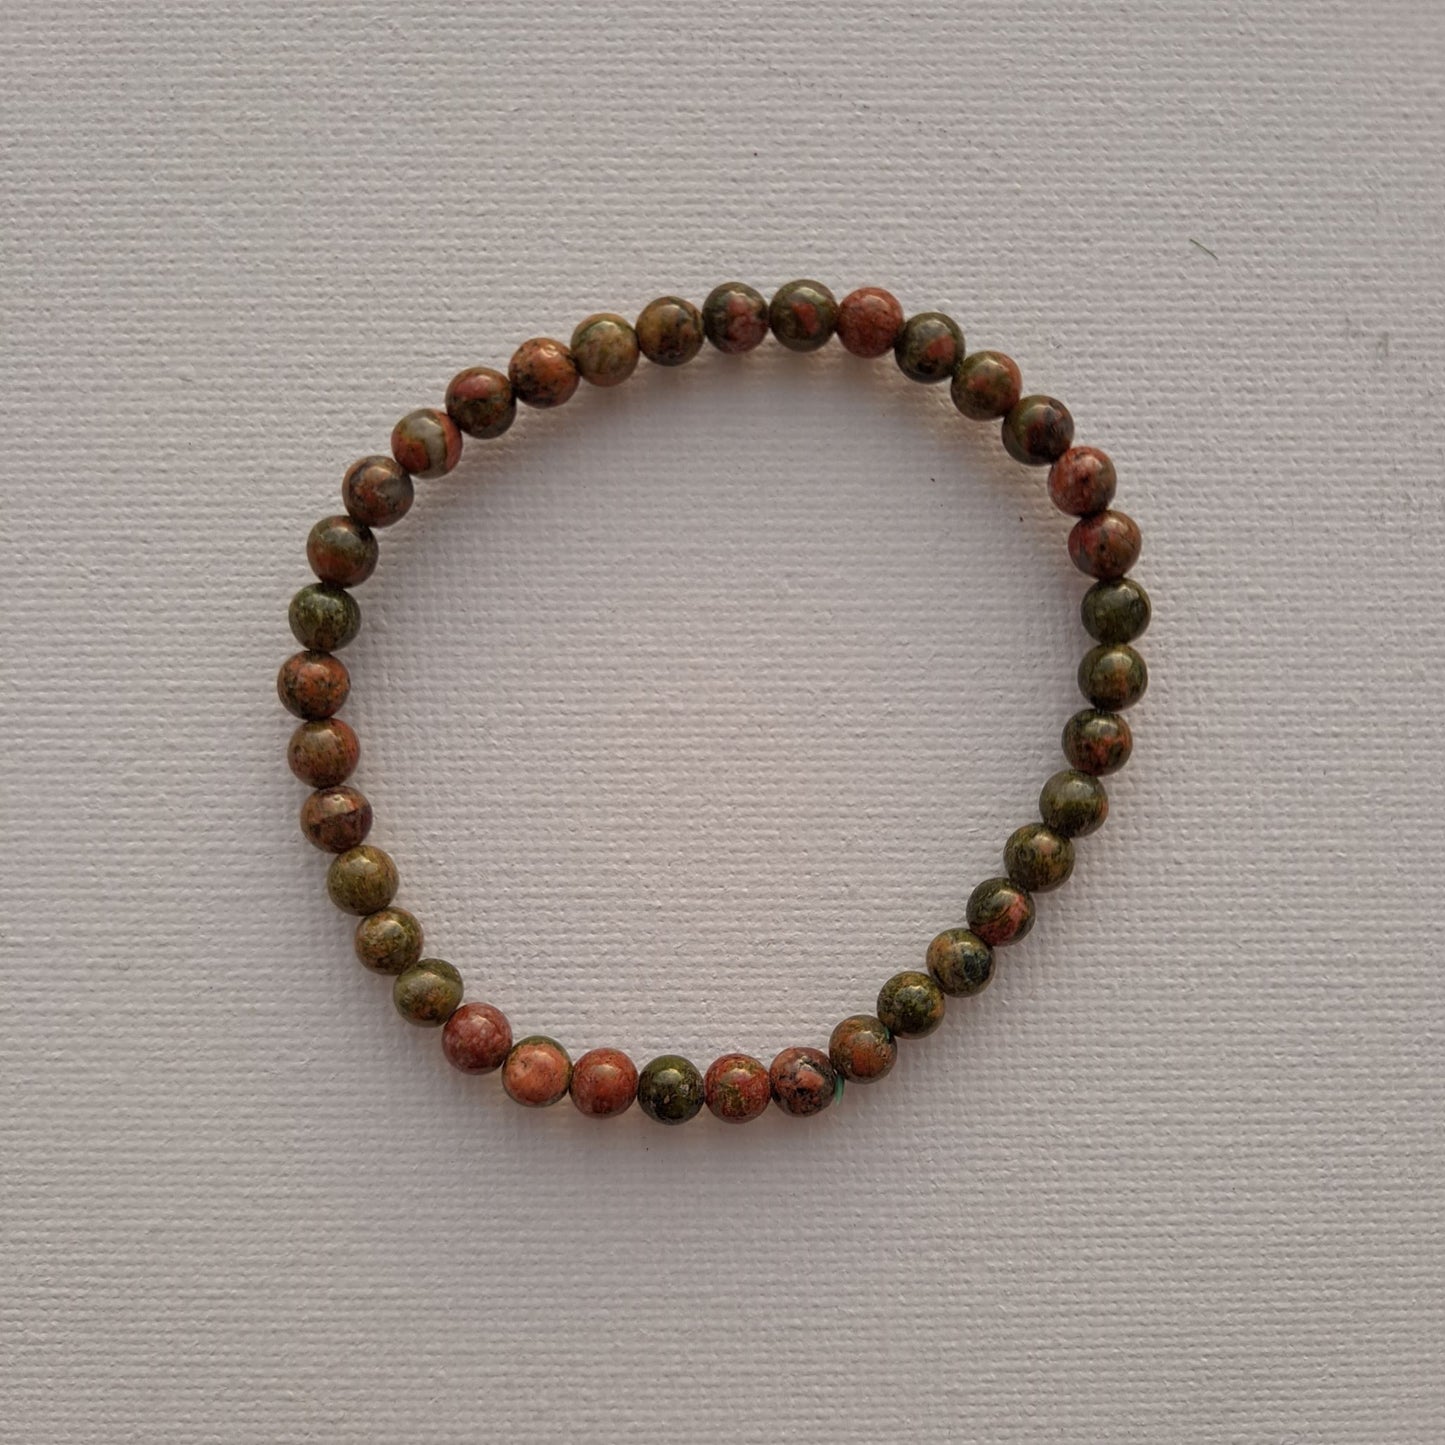 Dumi's Crystals | Unakite Stretch Bracelet (7 Inch with 4mm Beads) | Close-up of a handcrafted bracelet featuring genuine 4mm Unakite beads in calming shades of green and soft pink. Unakite is known as the stone of emotional healing and is believed to promote emotional balance, healing past wounds, self-love, and a positive outlook.